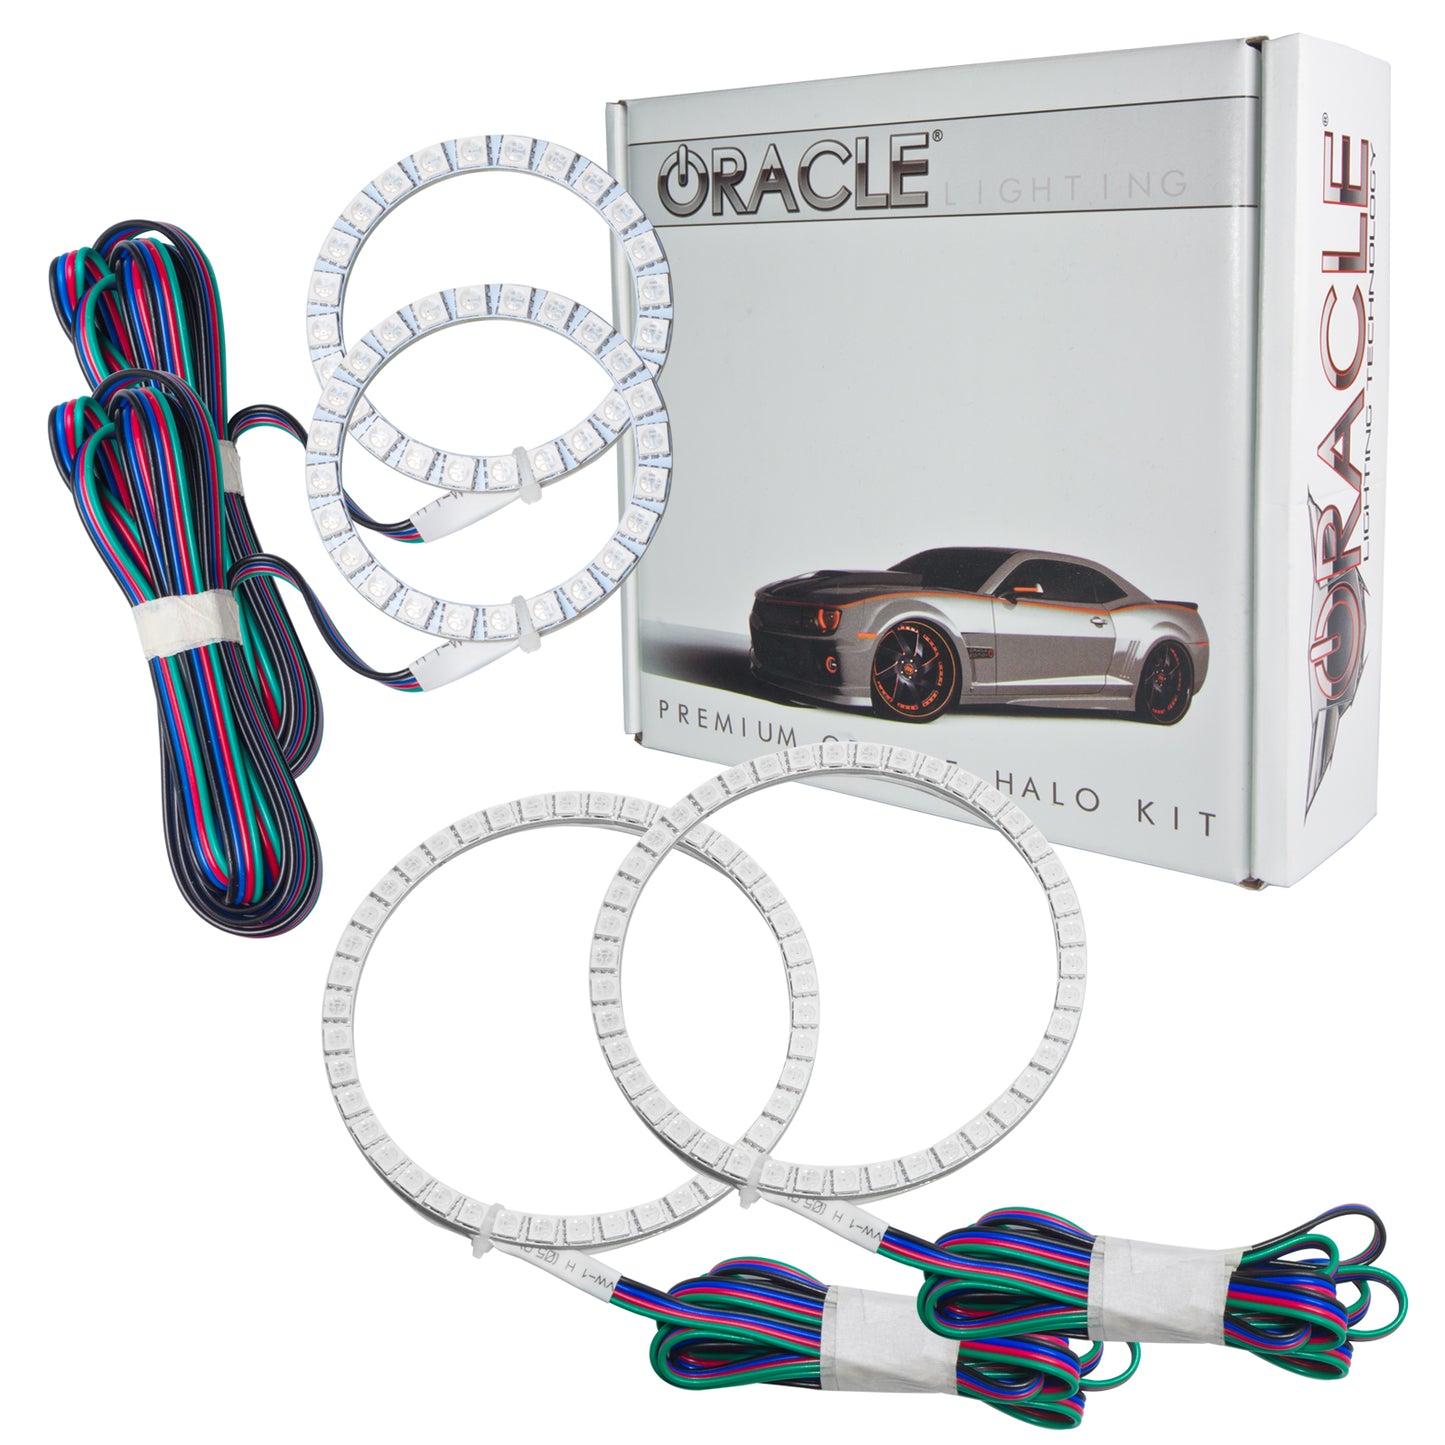 Oracle Lighting 2502-333 - Nissan GT-R 2009-2013 ORACLE ColorSHIFT Halo Kit